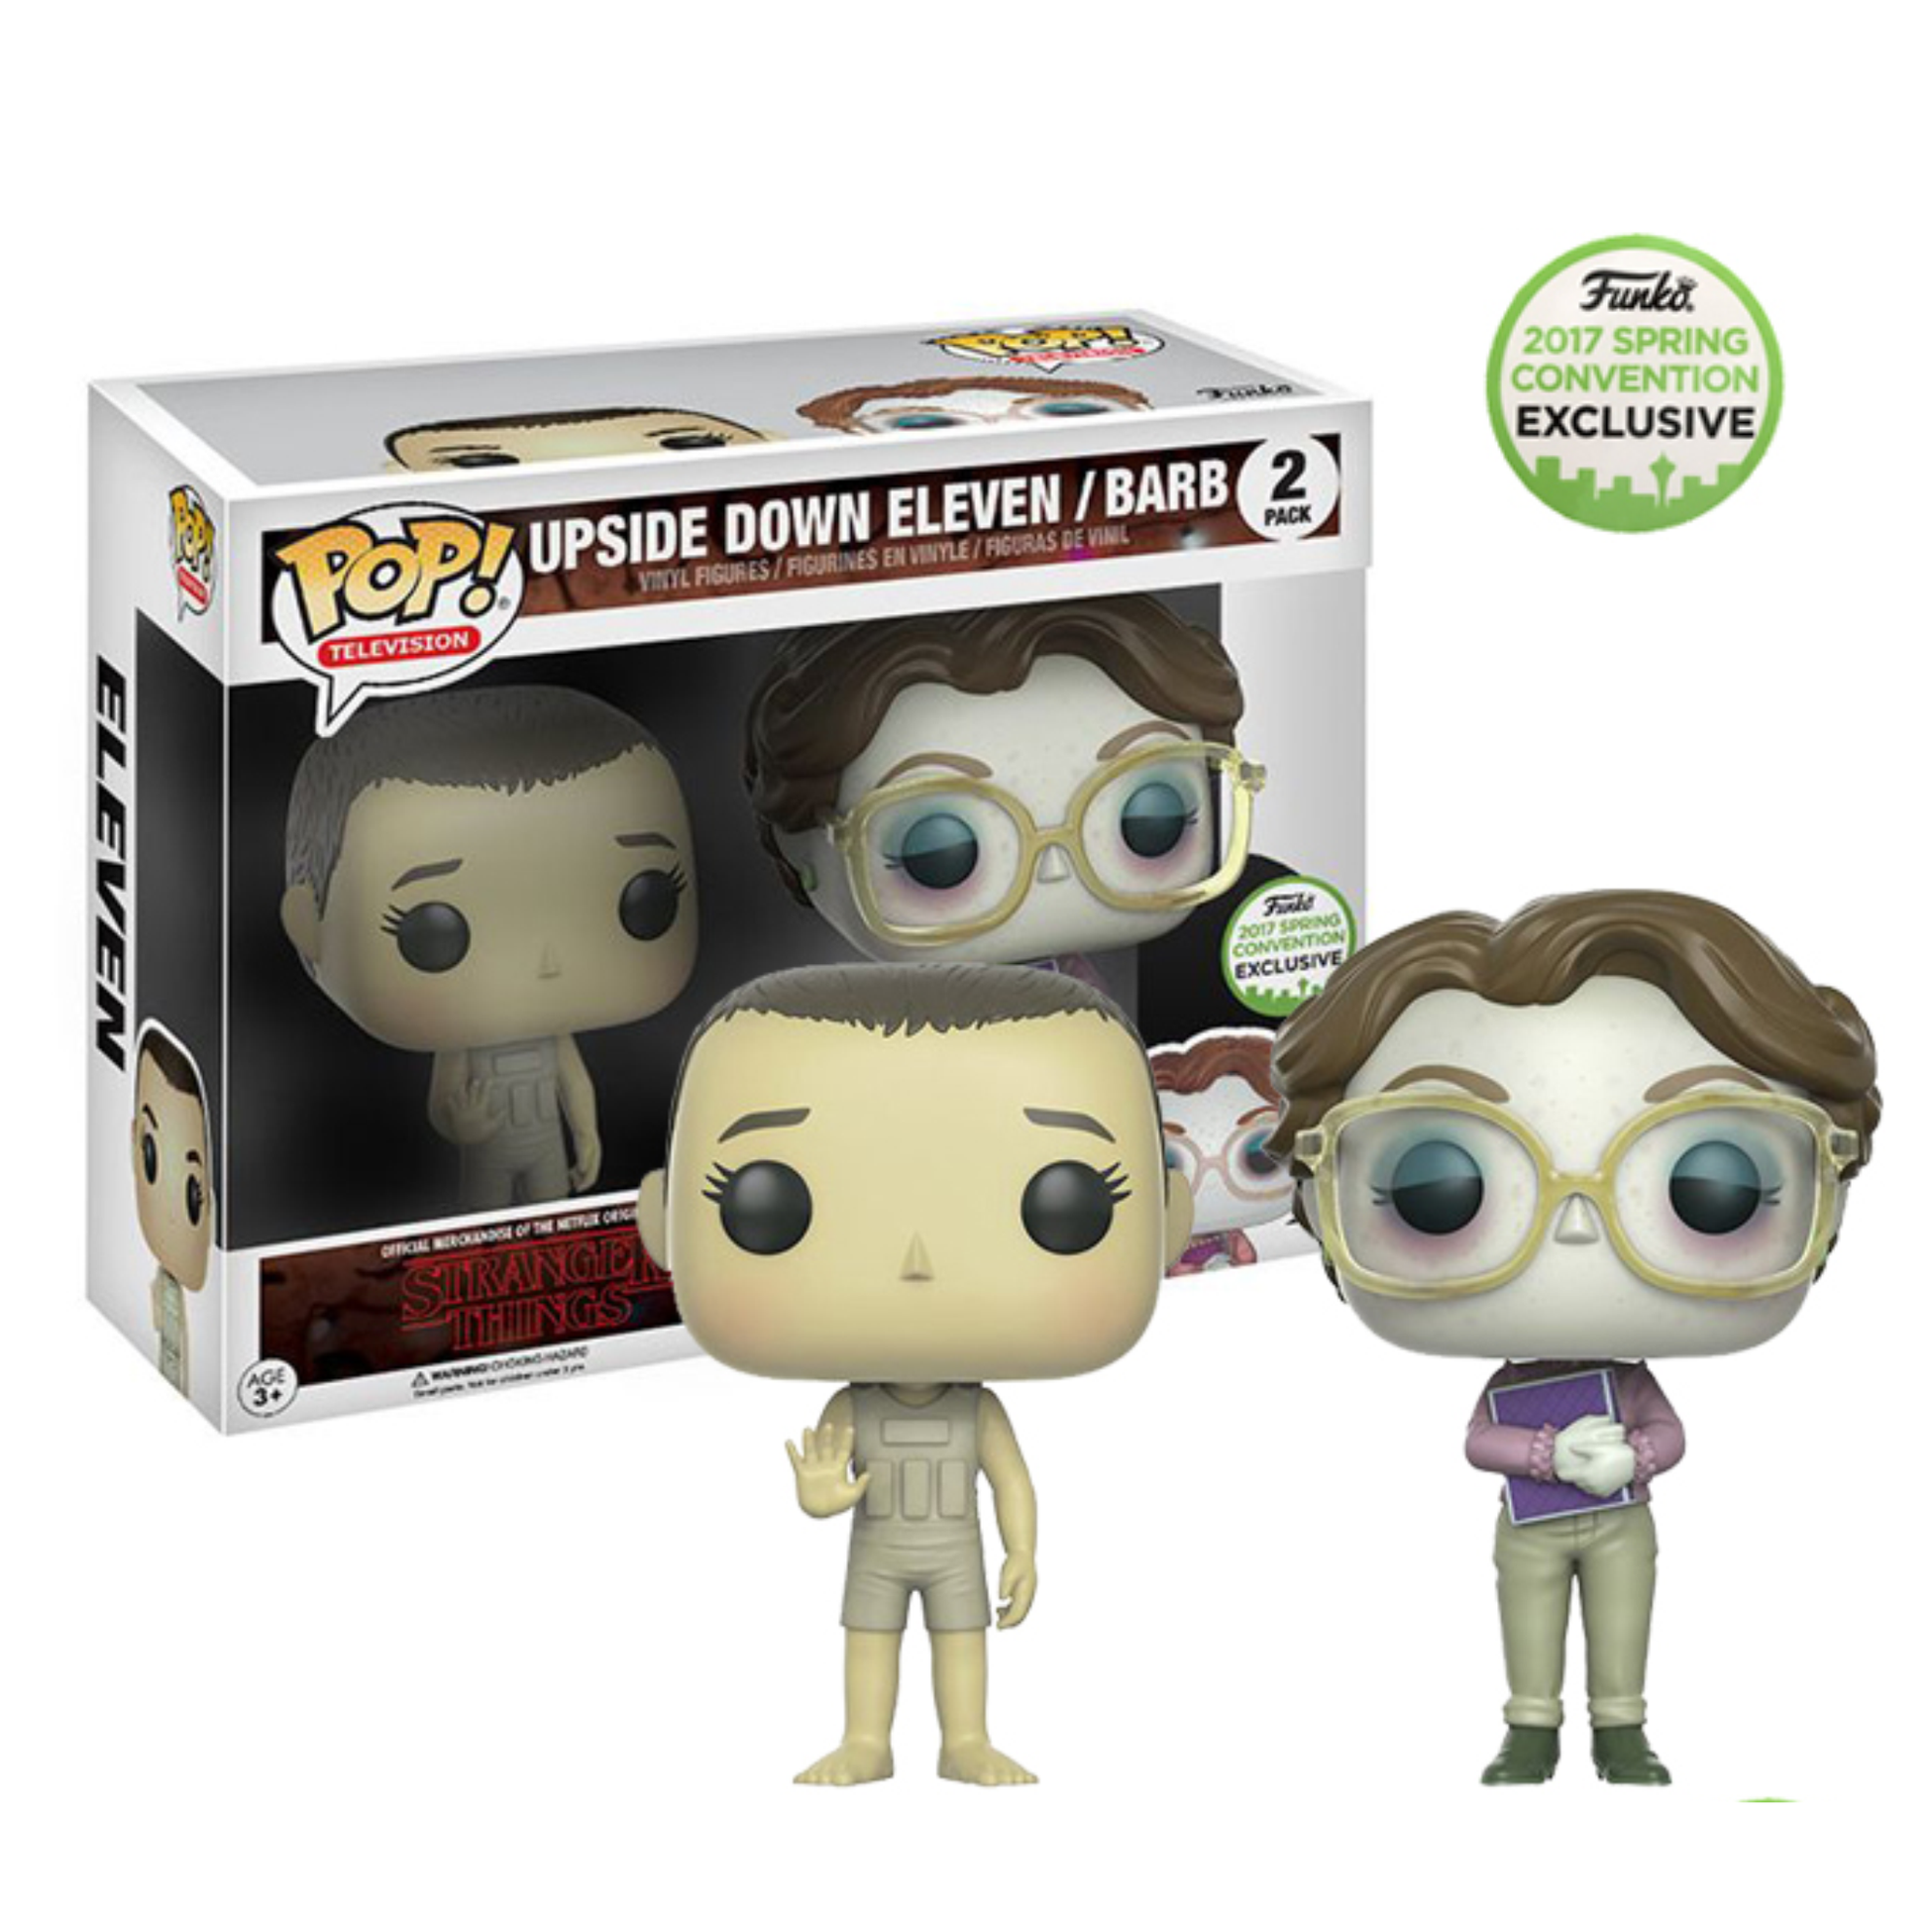 koolaz-ltd - Stranger Things: Upside Down Eleven and Barb 2 Pack 2017 Convention Exclusive - Funko - Pop Vinyl